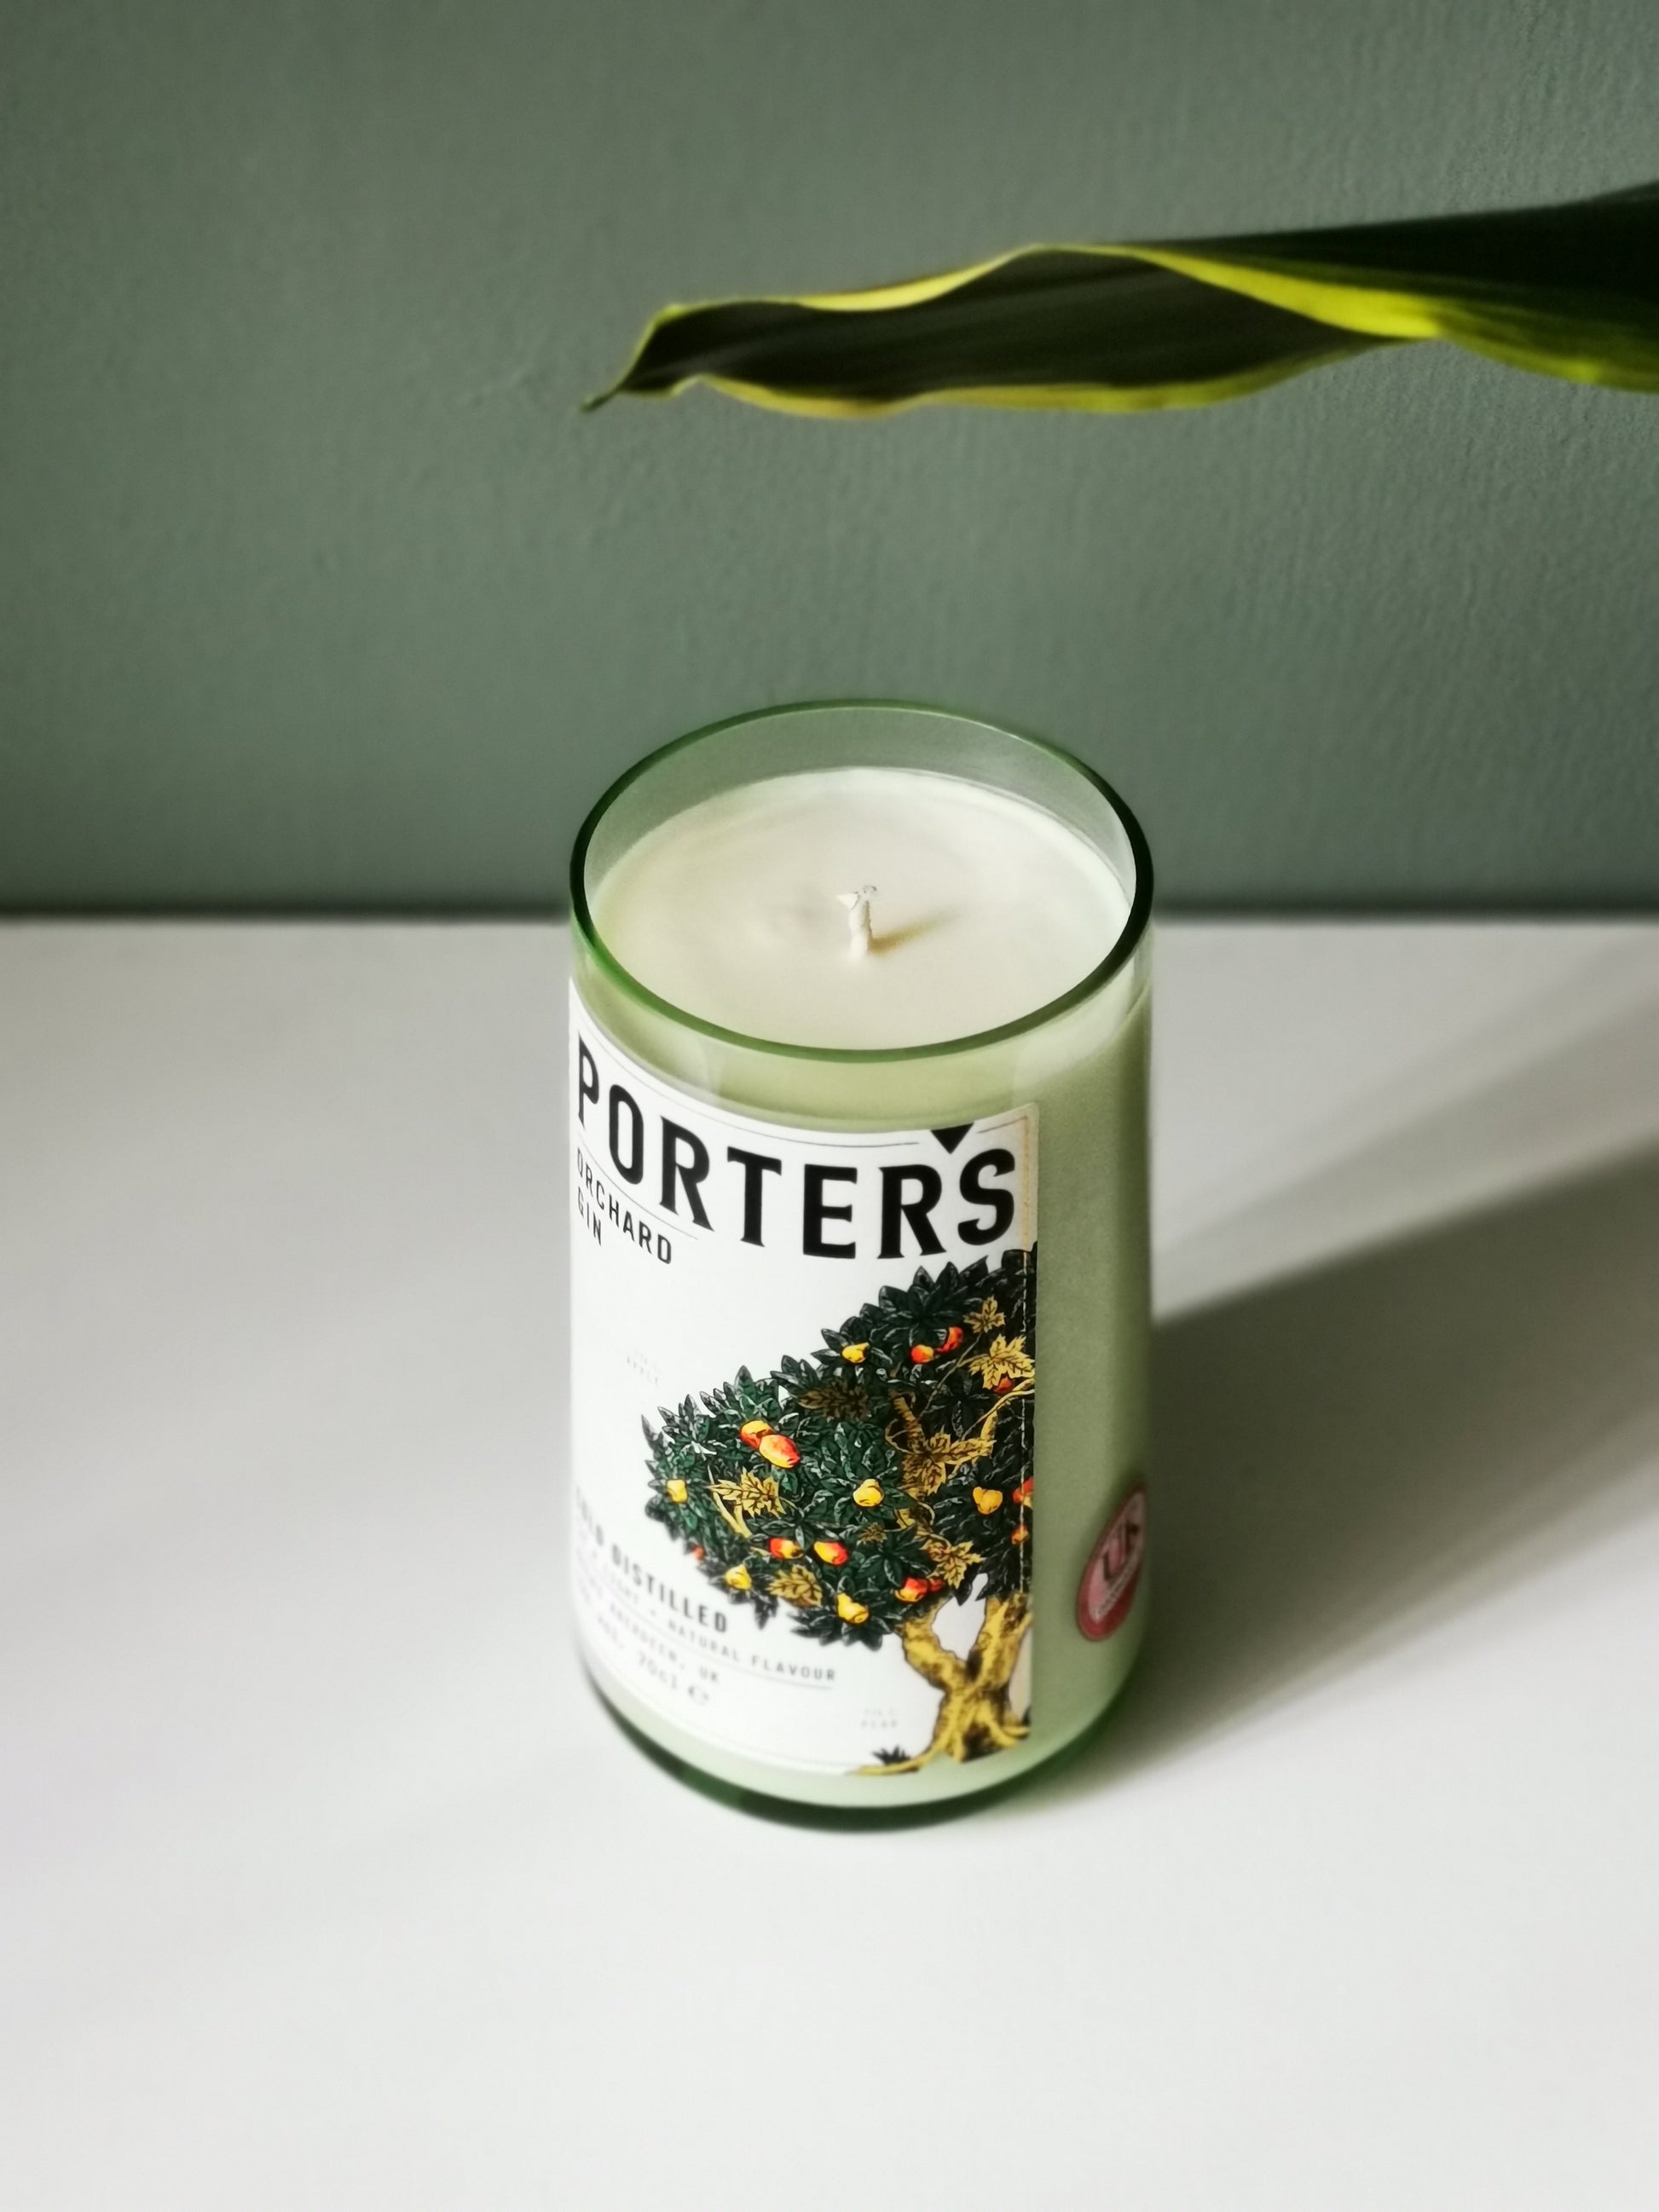 Eco Friendly-Porters Orchard Gin Bottle Candle-Gin Bottle Candles-Adhock Homeware